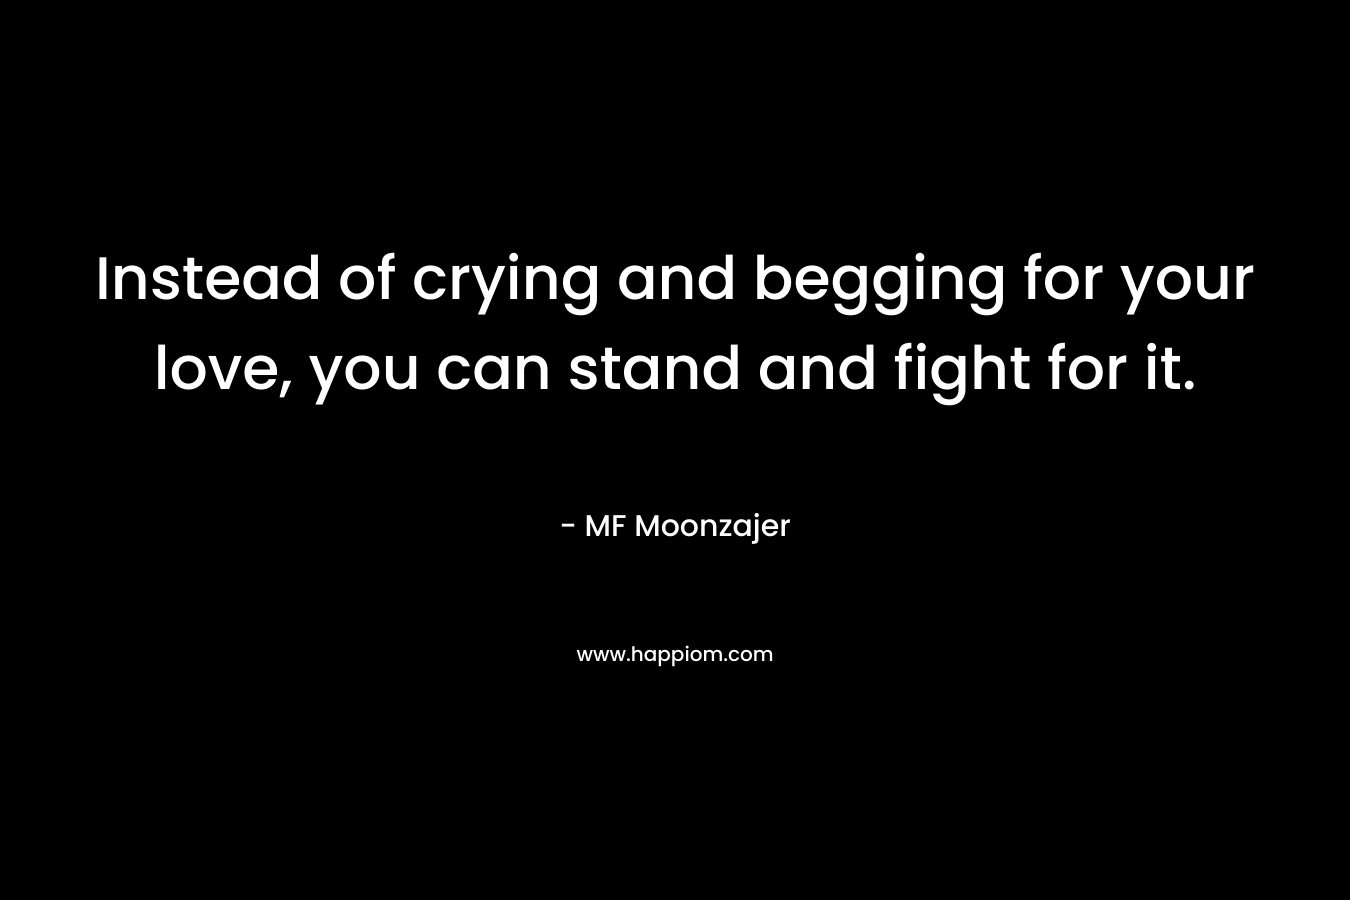 Instead of crying and begging for your love, you can stand and fight for it. – MF Moonzajer